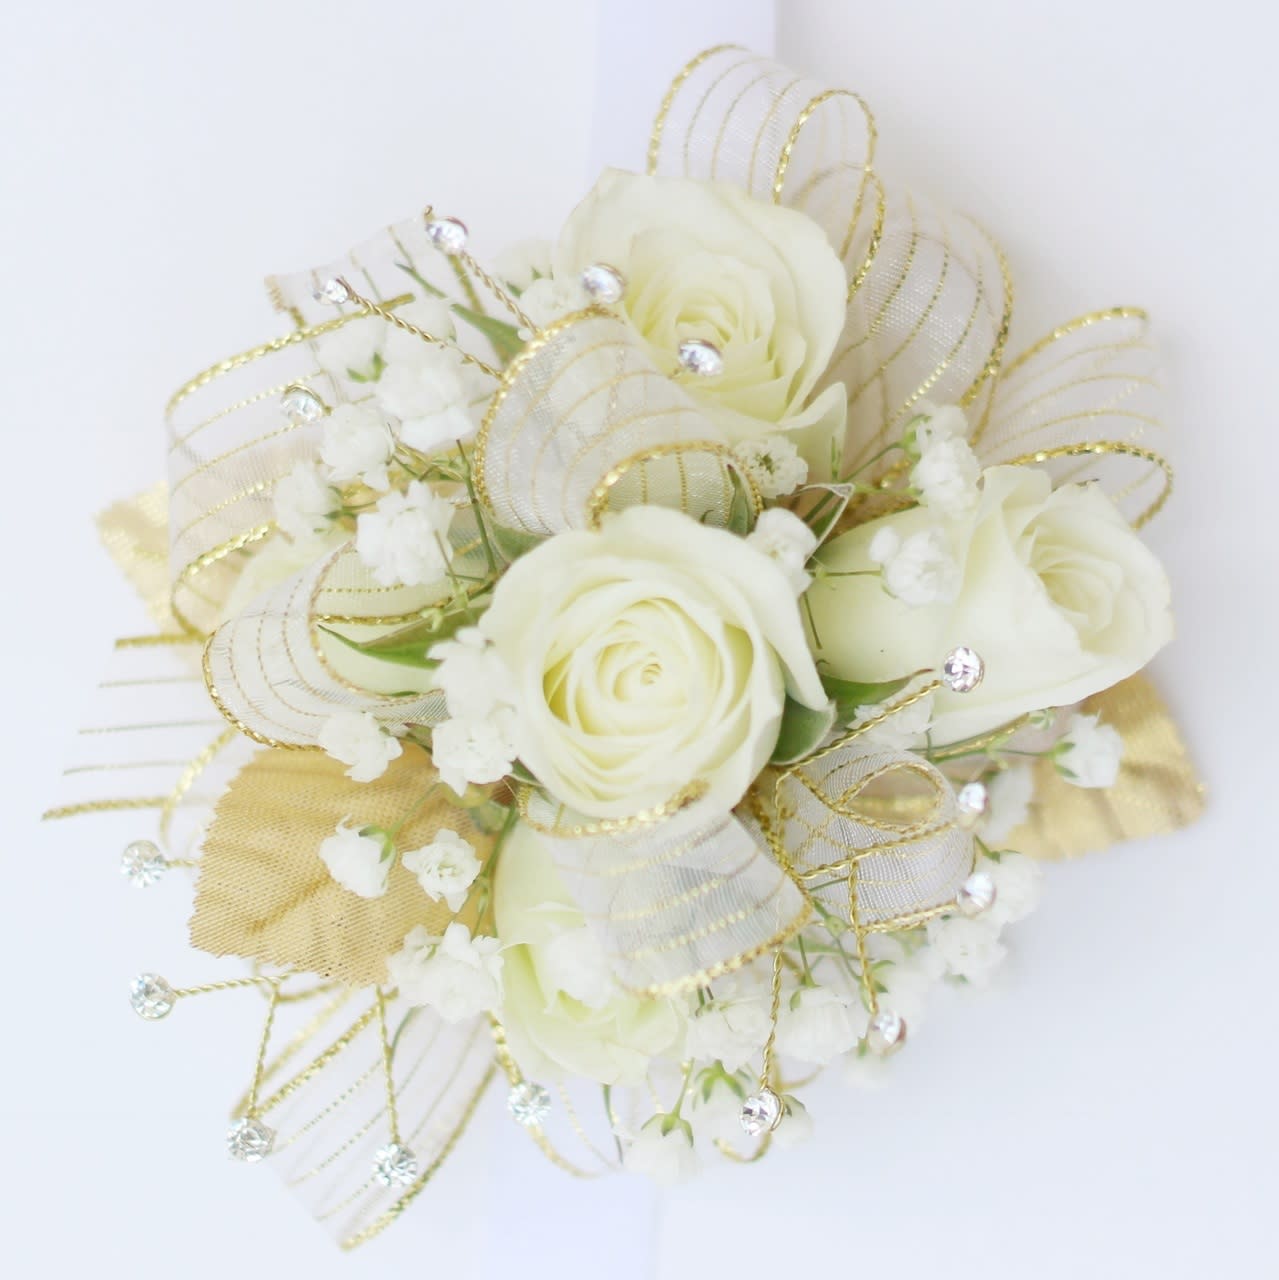 Glistening Gold Corsage in Dryden, NY | Arnold's Flower Shop